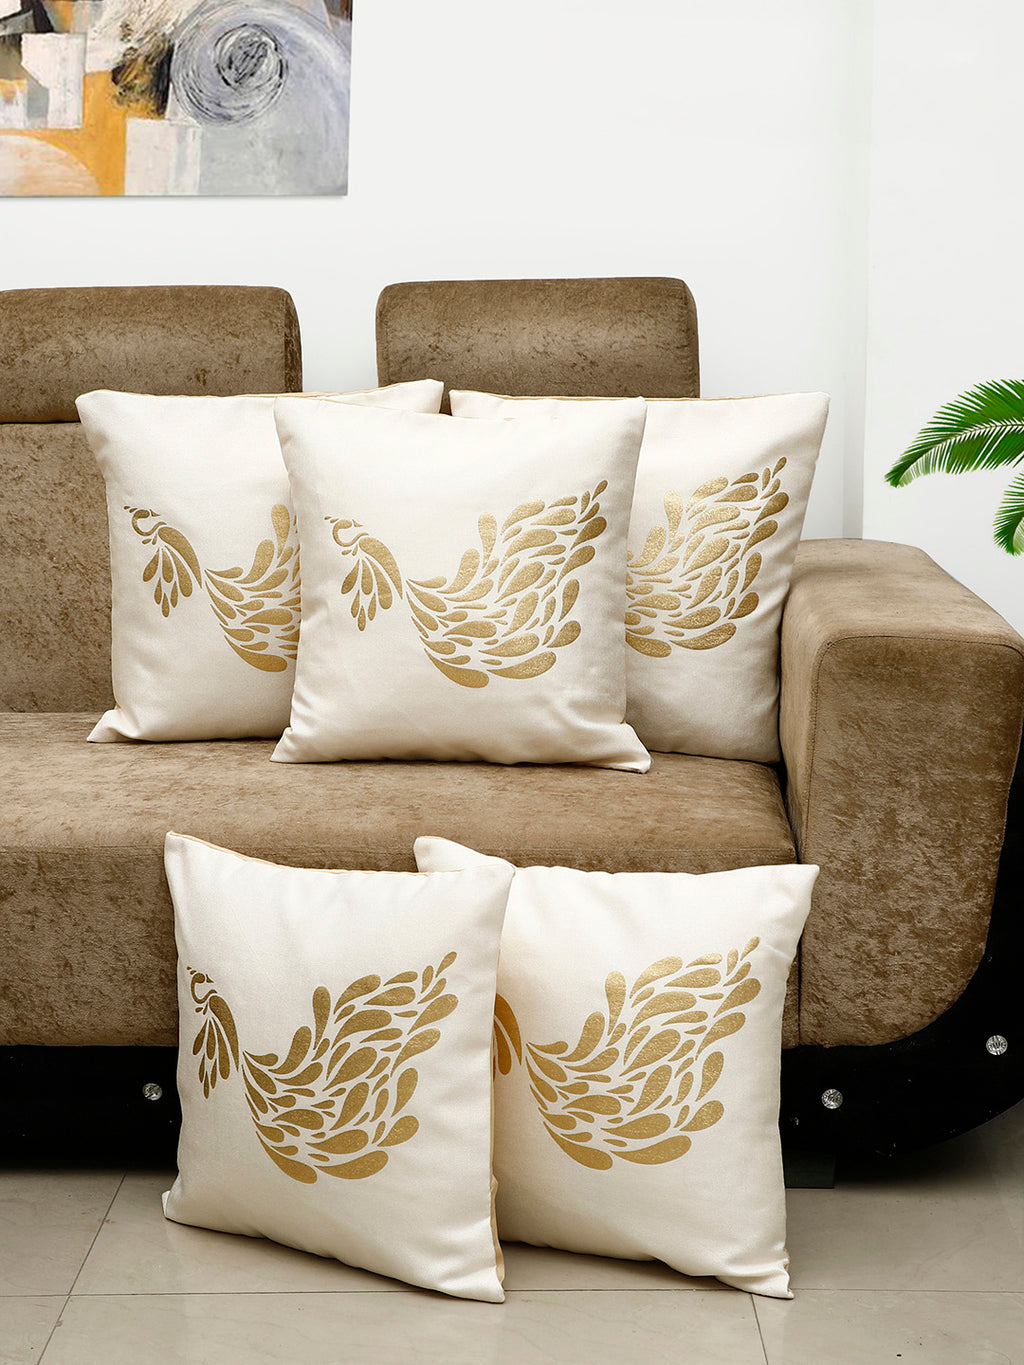 Detec™ Hosta Beige Golden Peacock Printed 16 x 16 inches Cushion Cover (Set of 5)